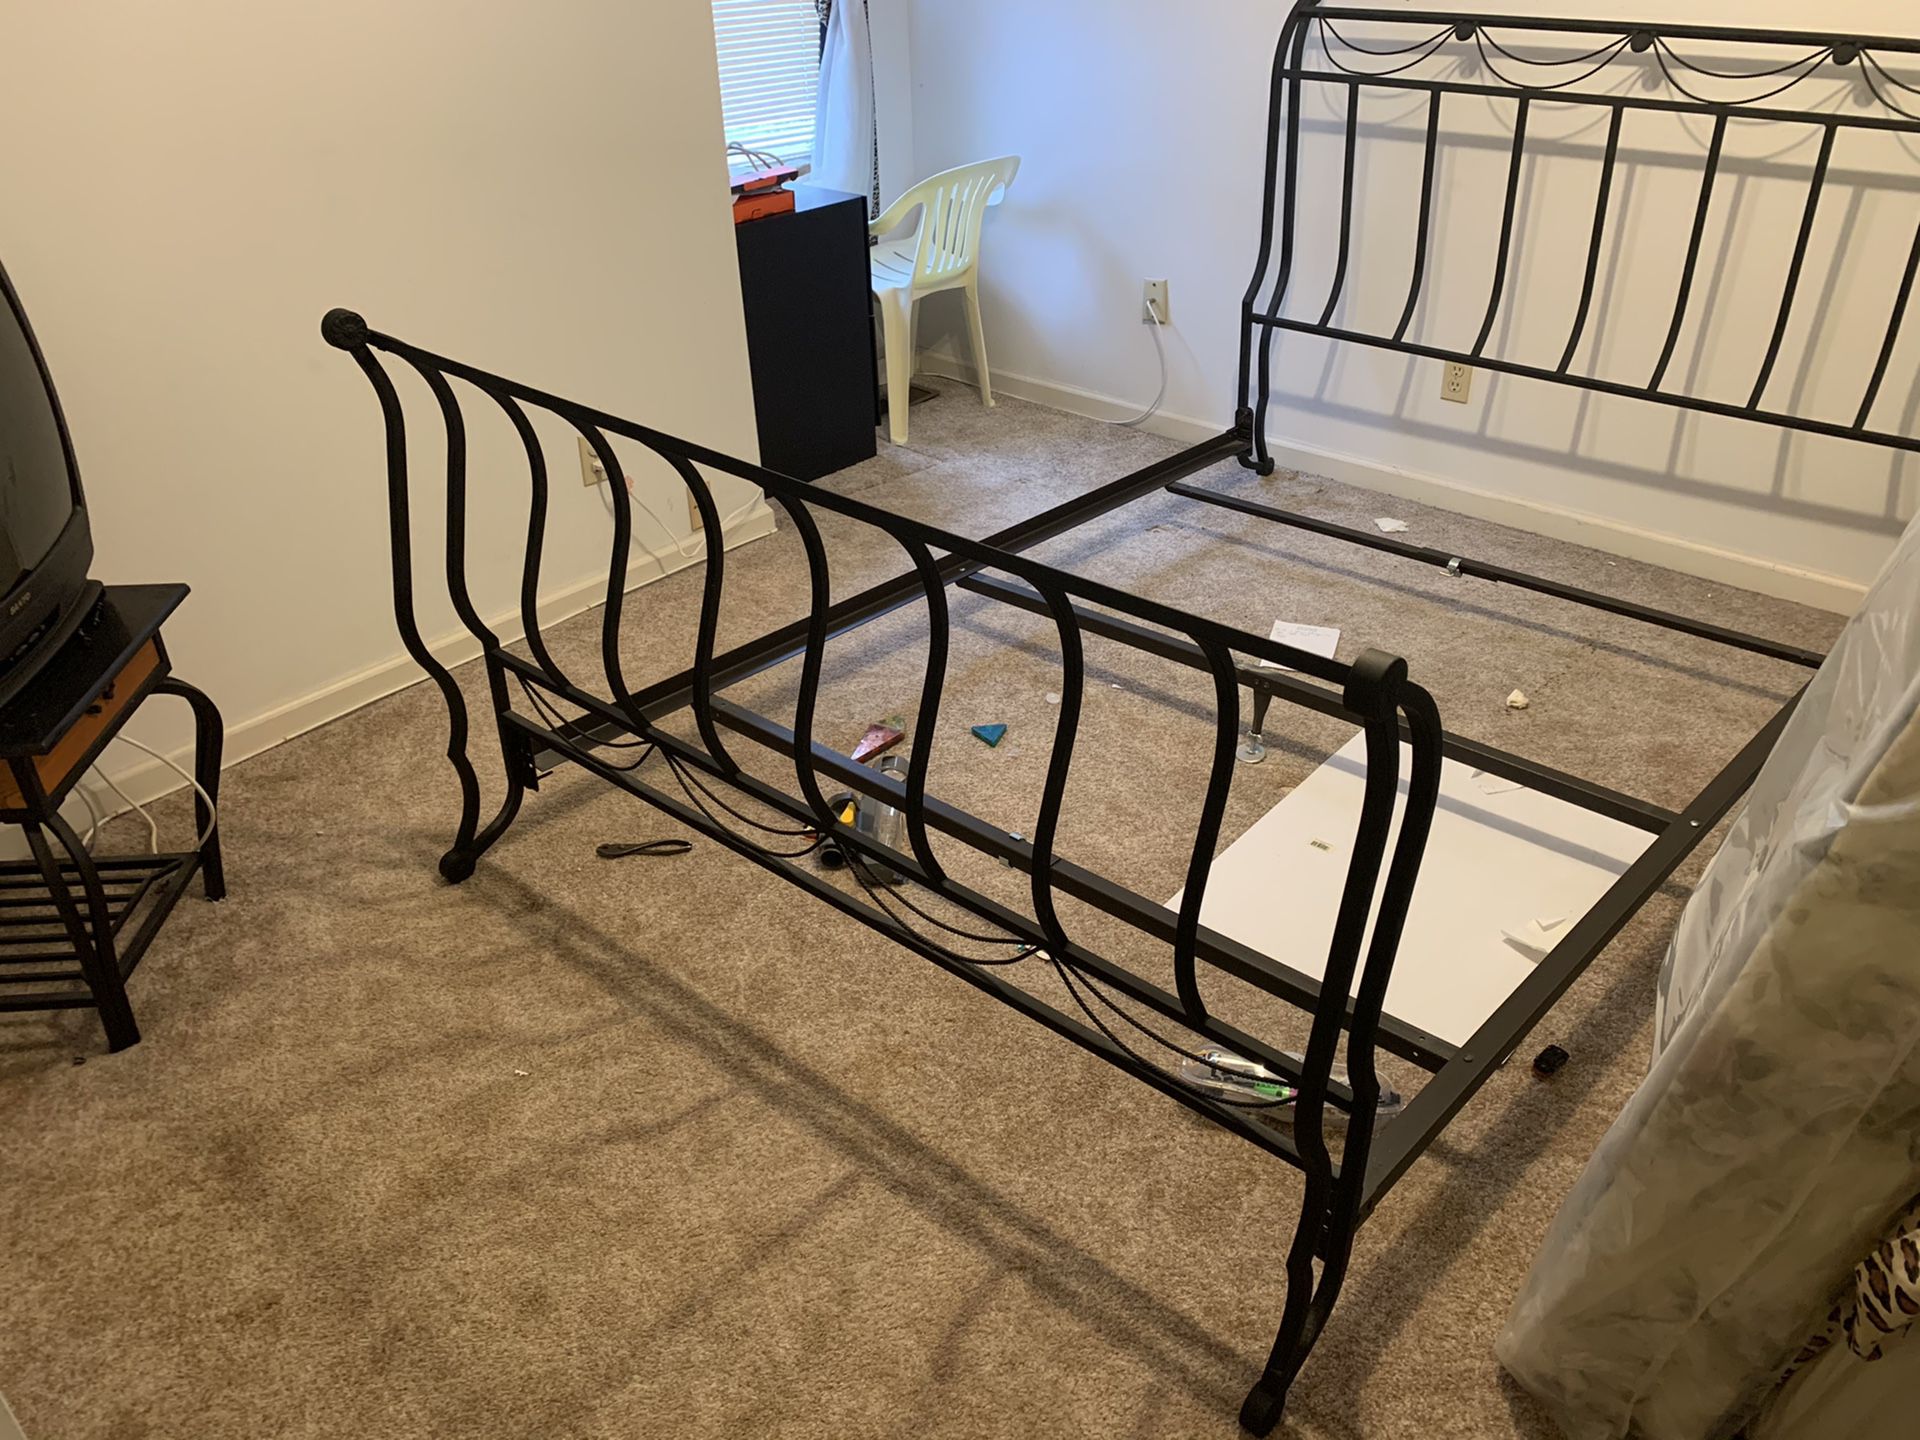 Queen bed frame and end table